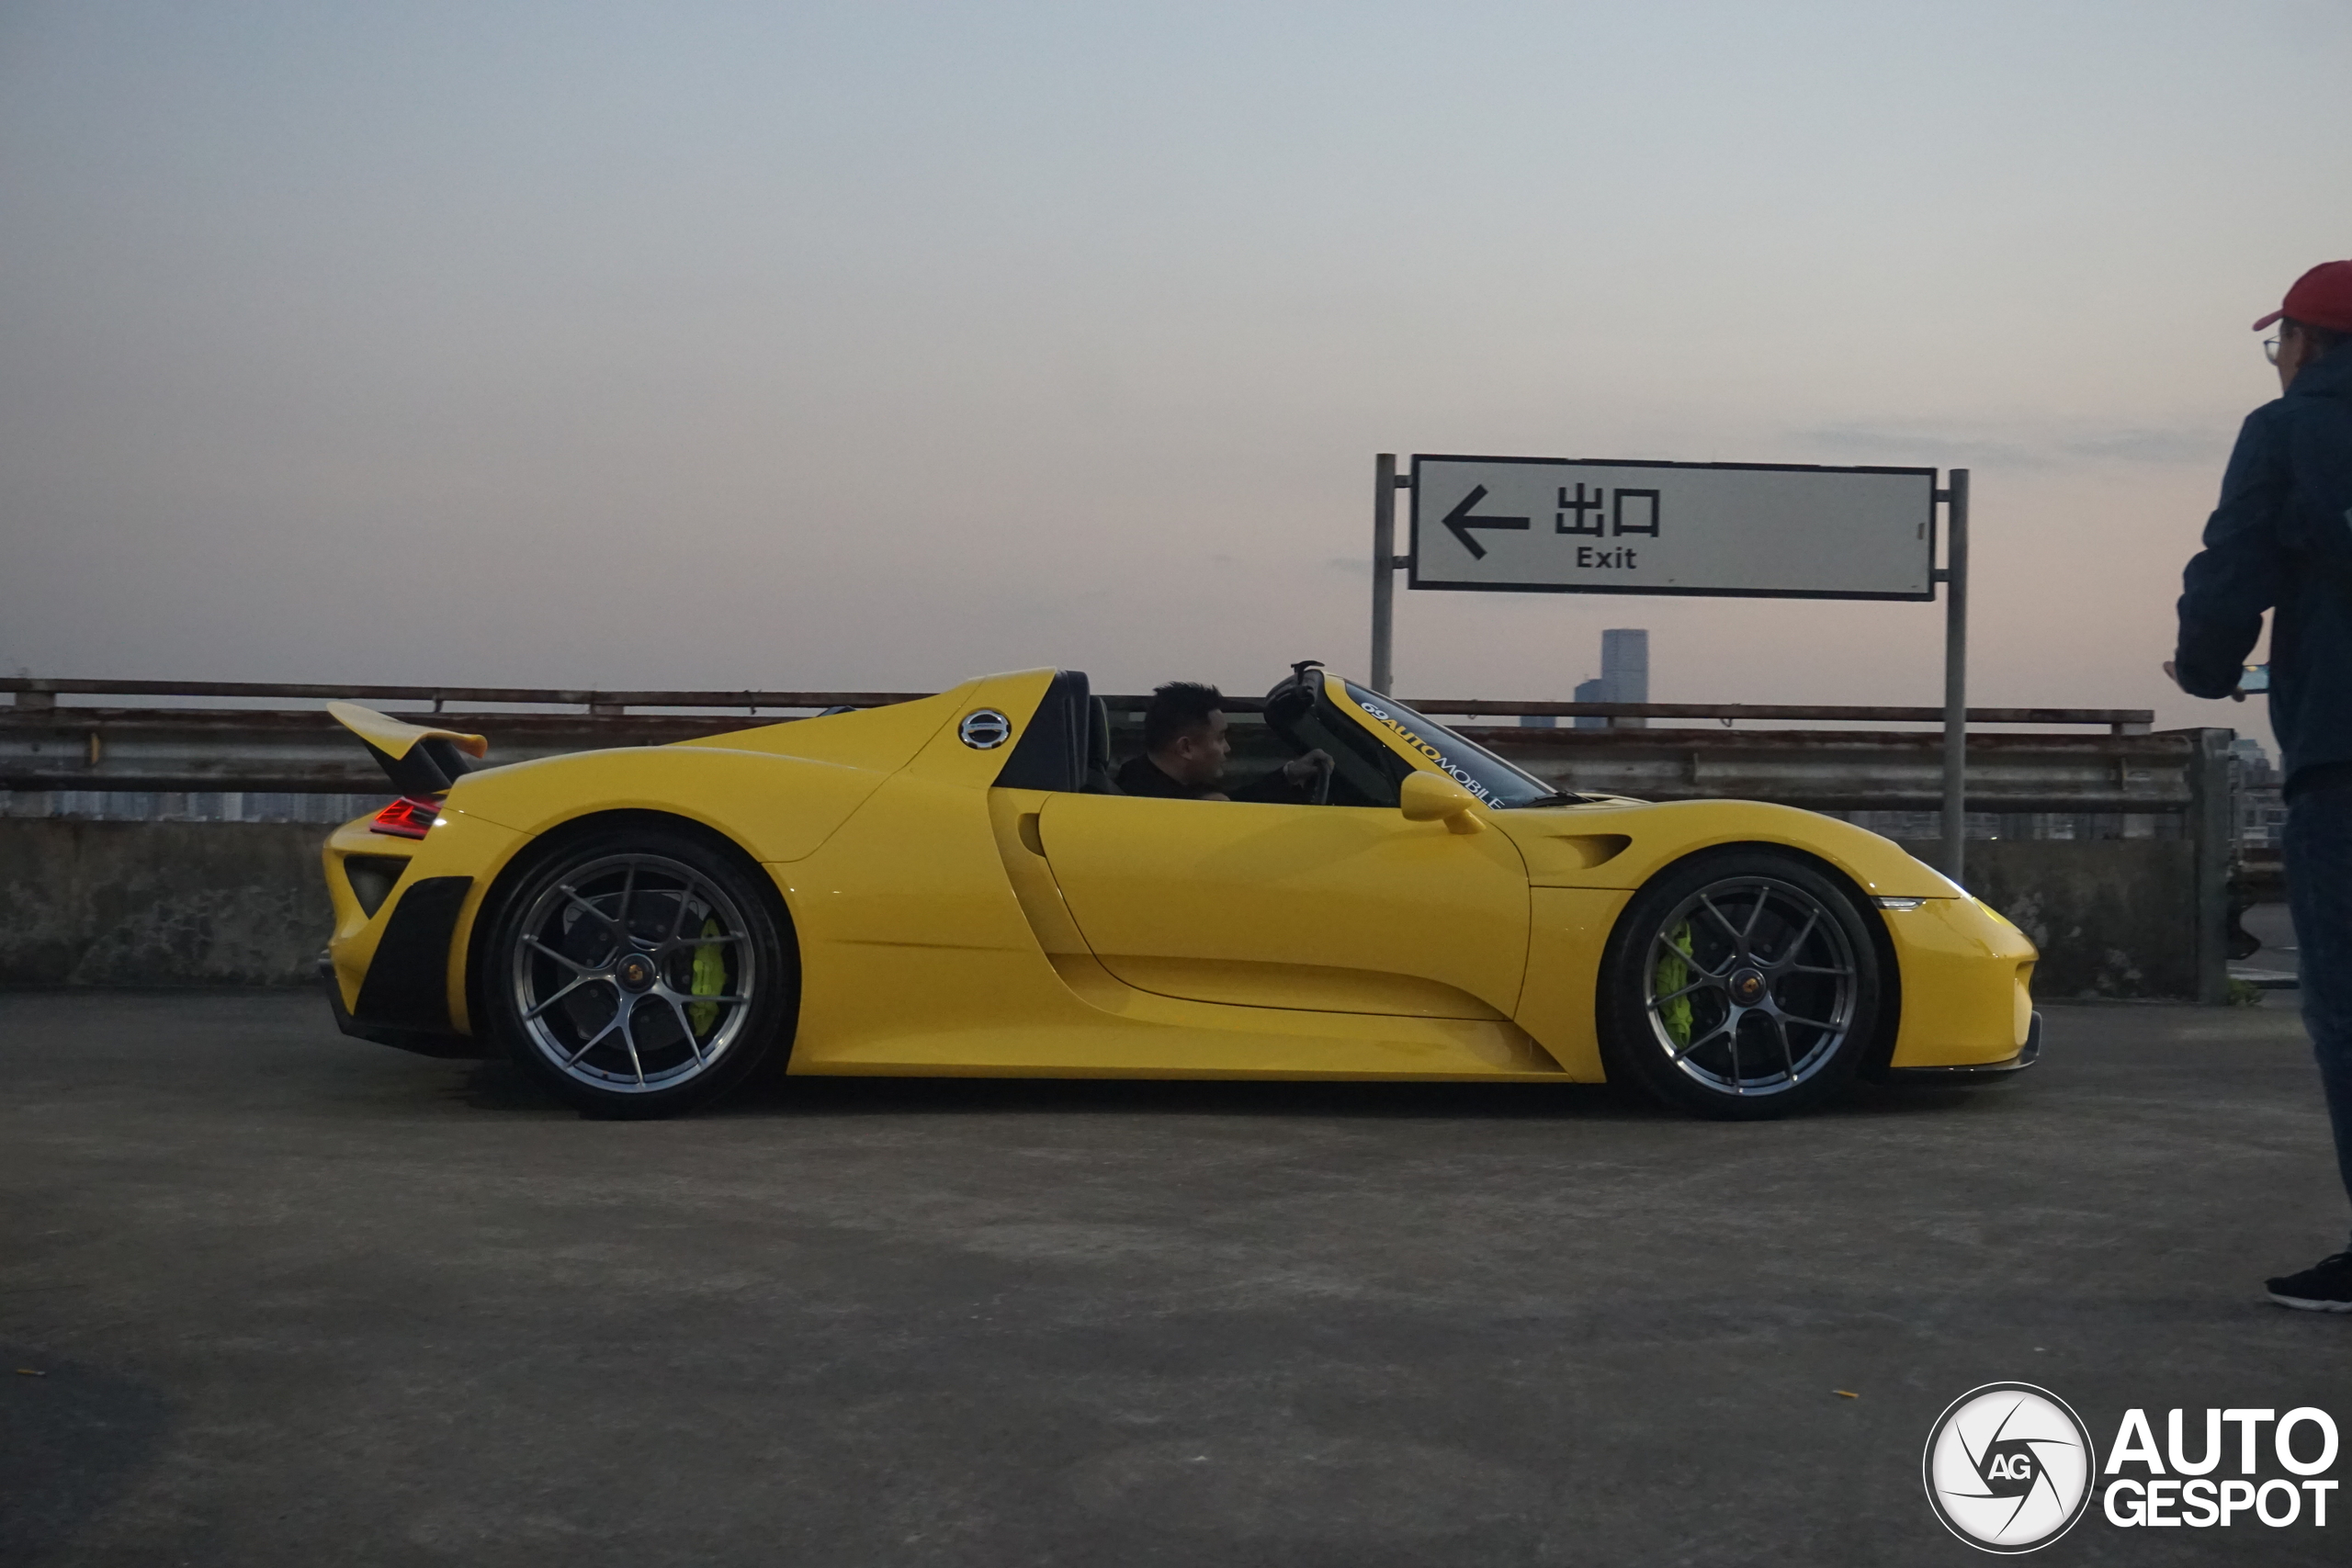 Taking the 918 to IKEA